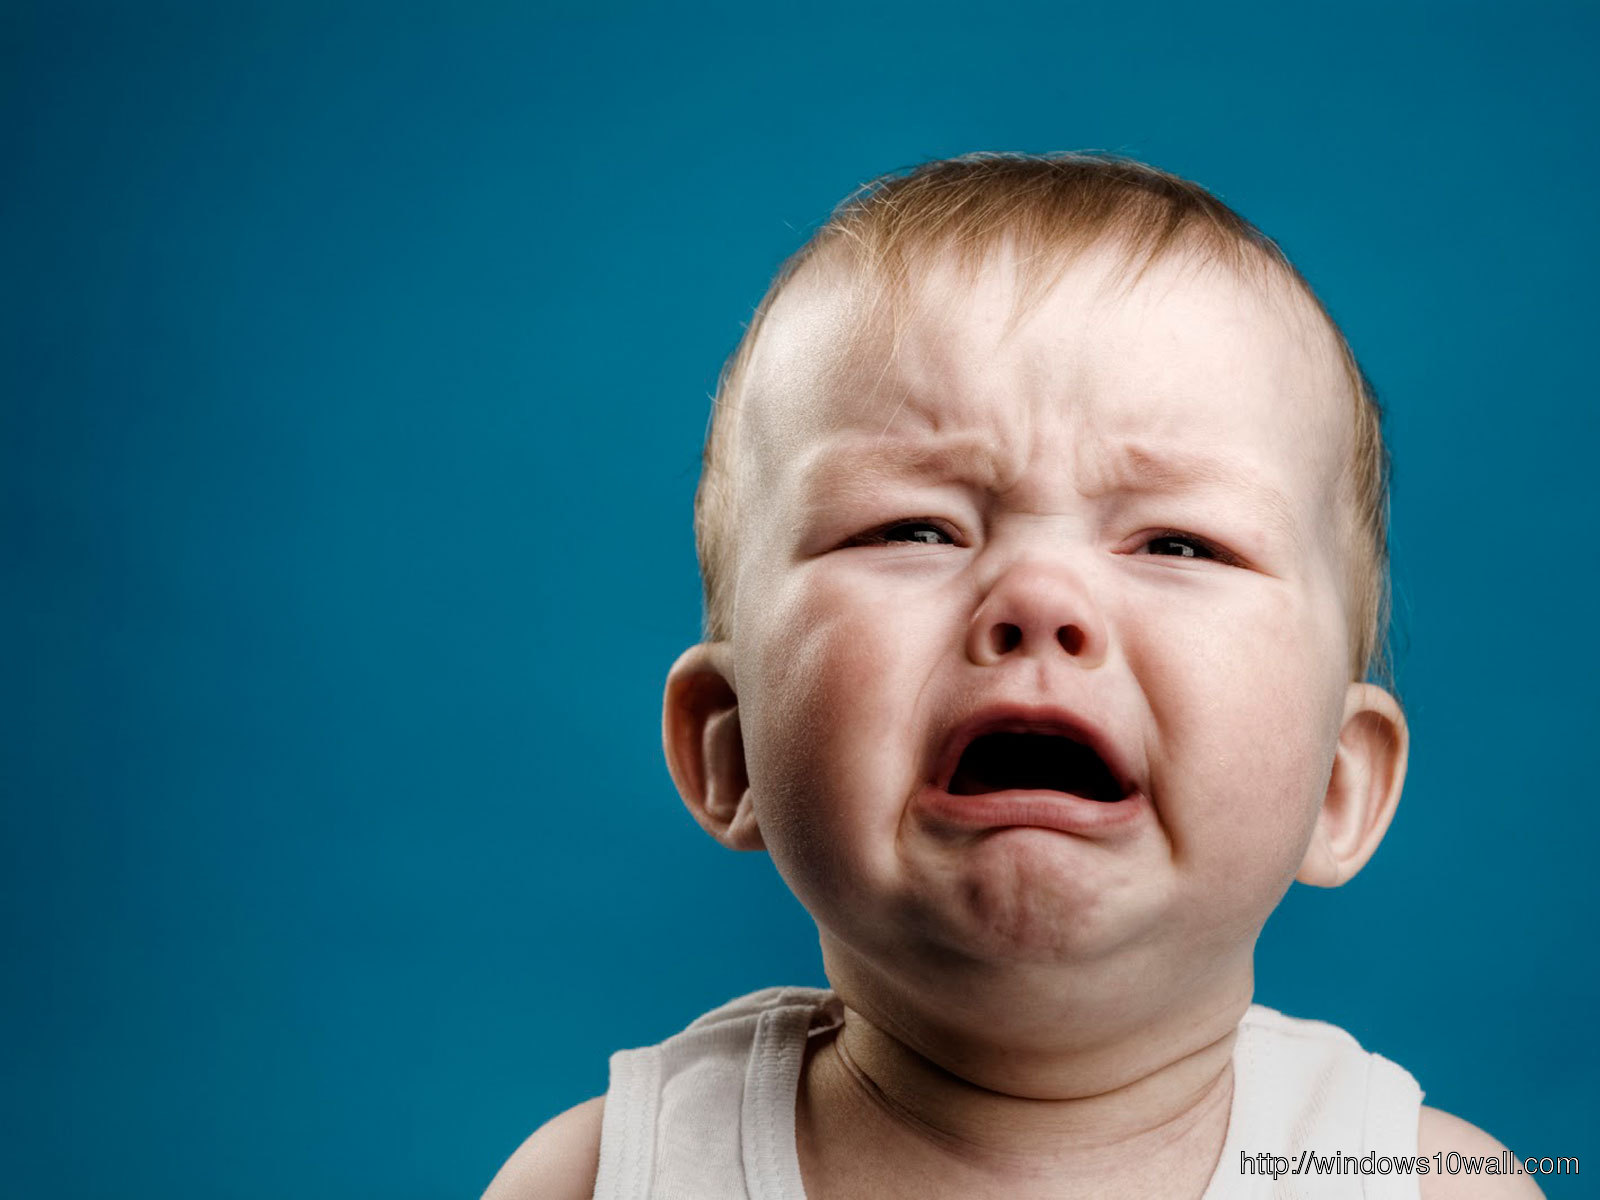 New Funny Baby Crying Background Wallpaper